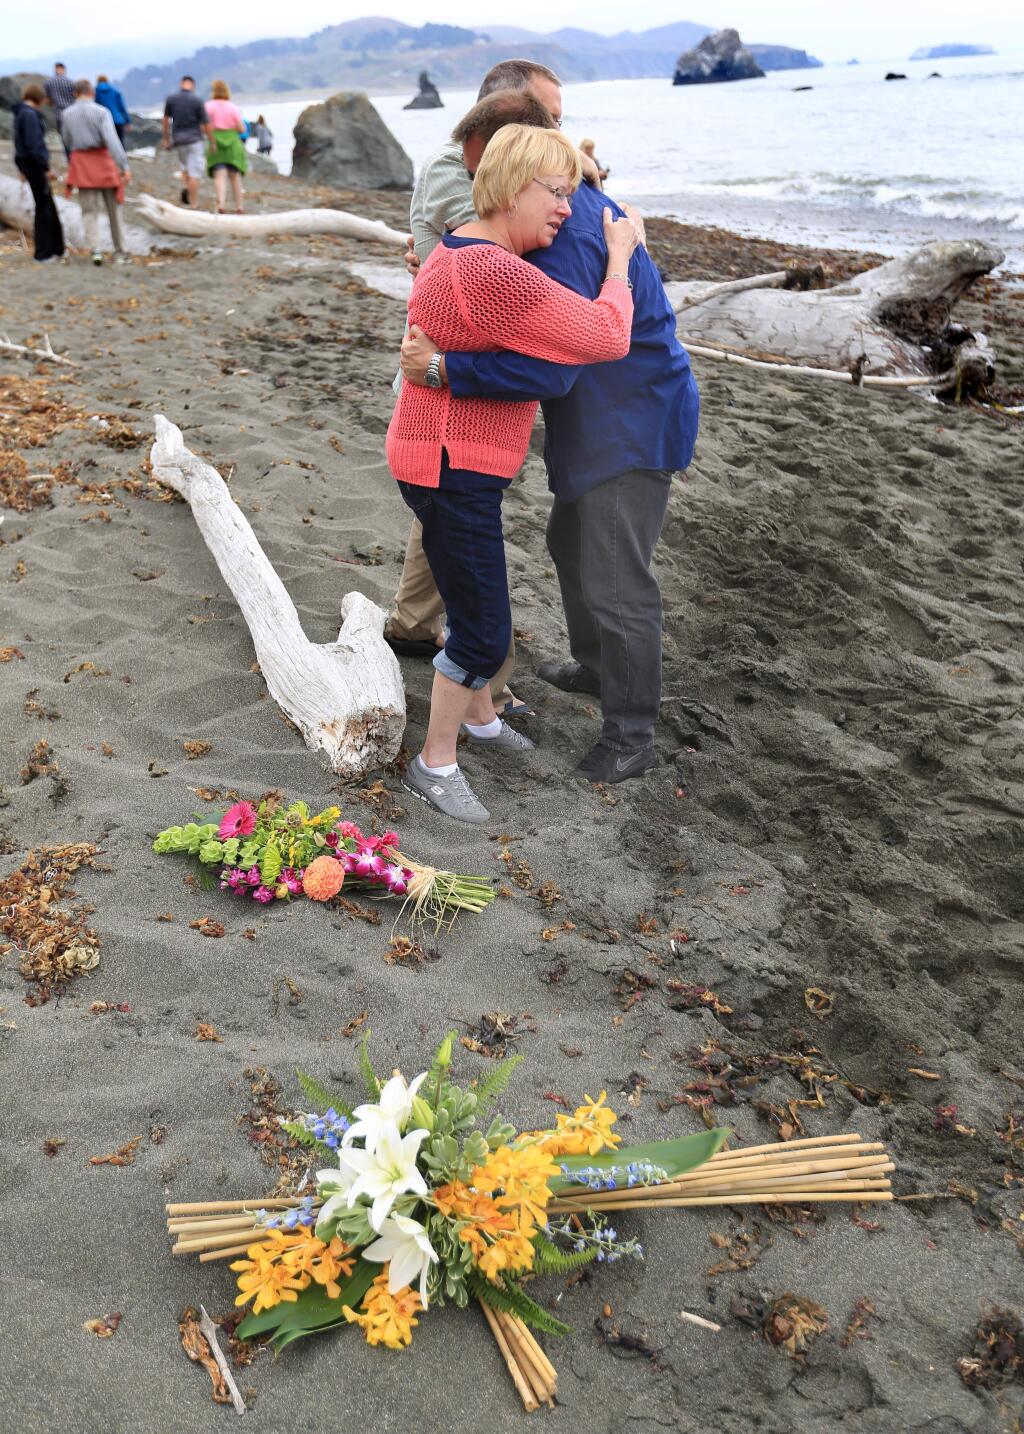 Kathy and Chris Cutshall embrace Sgt. Tim Duke of the Sonoma County Sheriff's Department, right, Friday, Aug. 15, 2014 at the site of their daughter Lindsay Cutshall's death with Jason Allen on Fish Head Beach just north of Jenner. The two were slain 10 years ago, but the crime remains unsolved. (Kent Porter / Press Democrat)